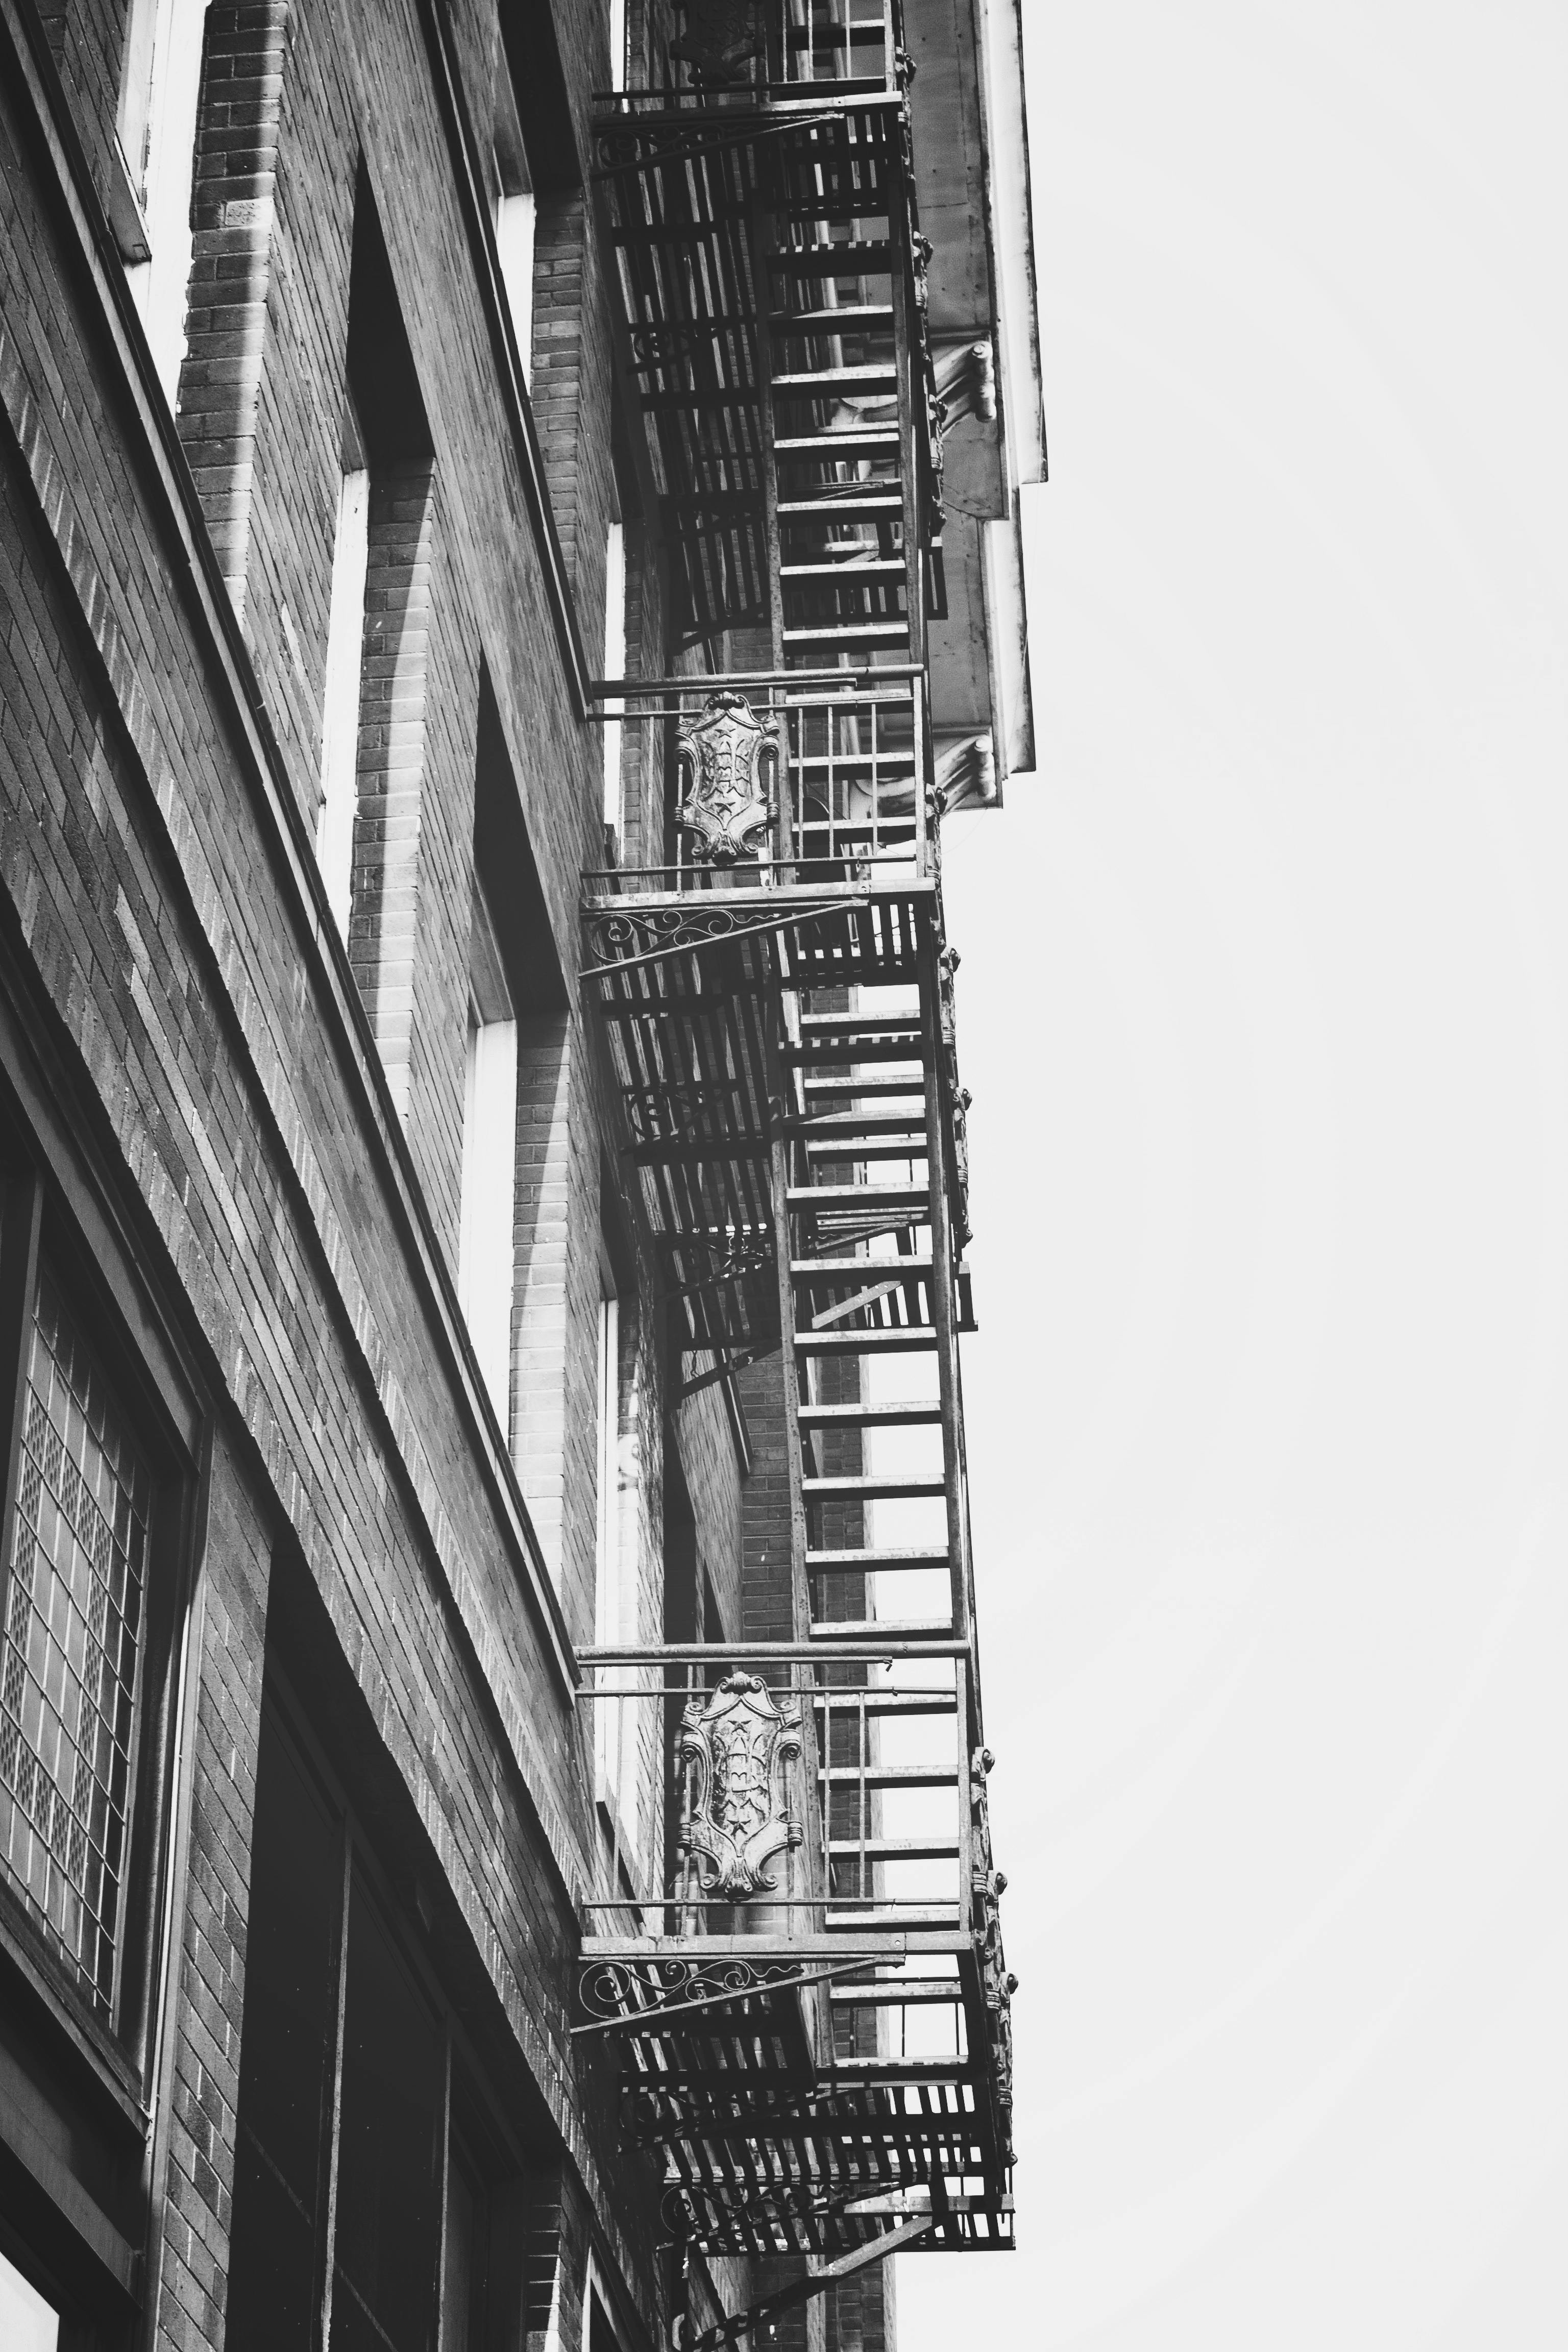 Free stock photo of black and white, buildings, industrial building